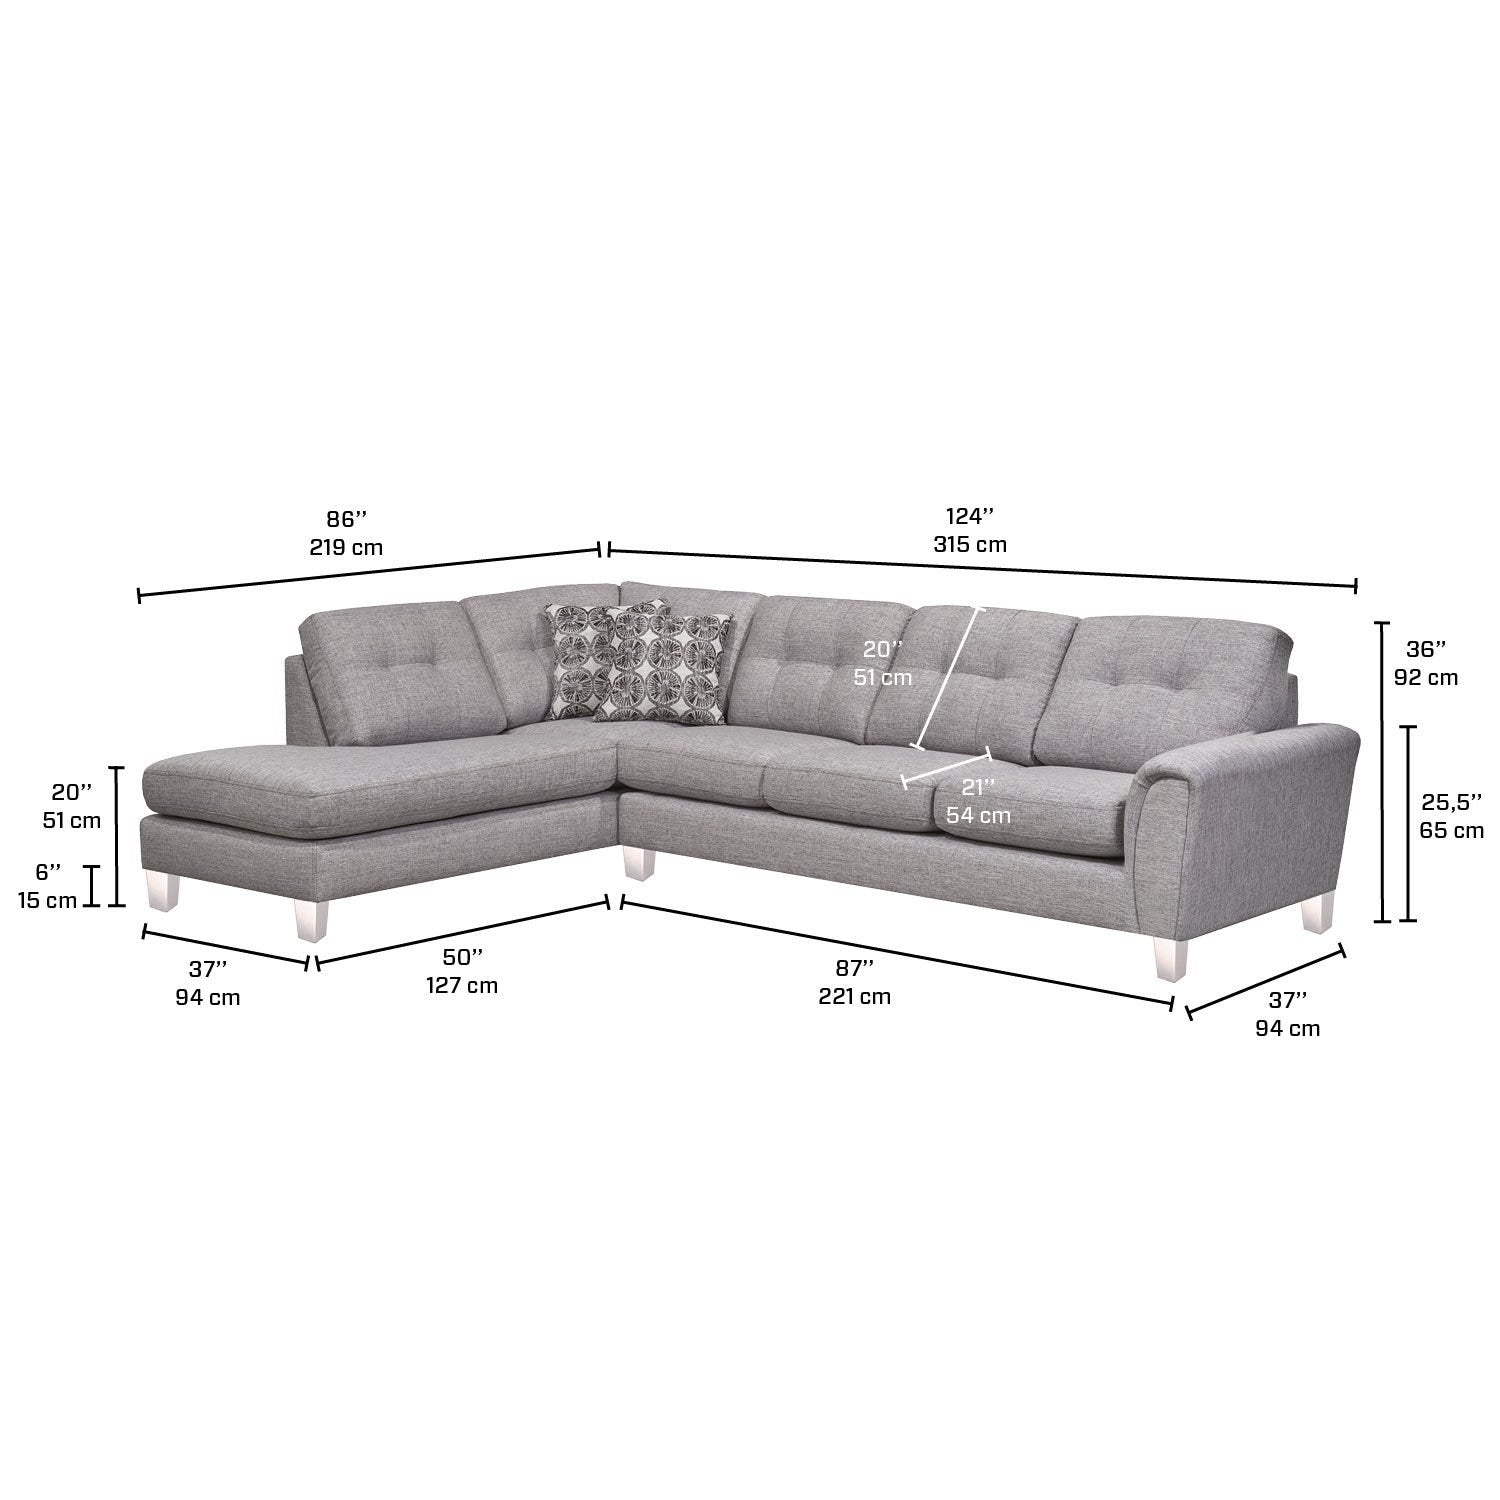 Canadian Made Jaden Collection Fabric Sectional Sofa in Grey 9825